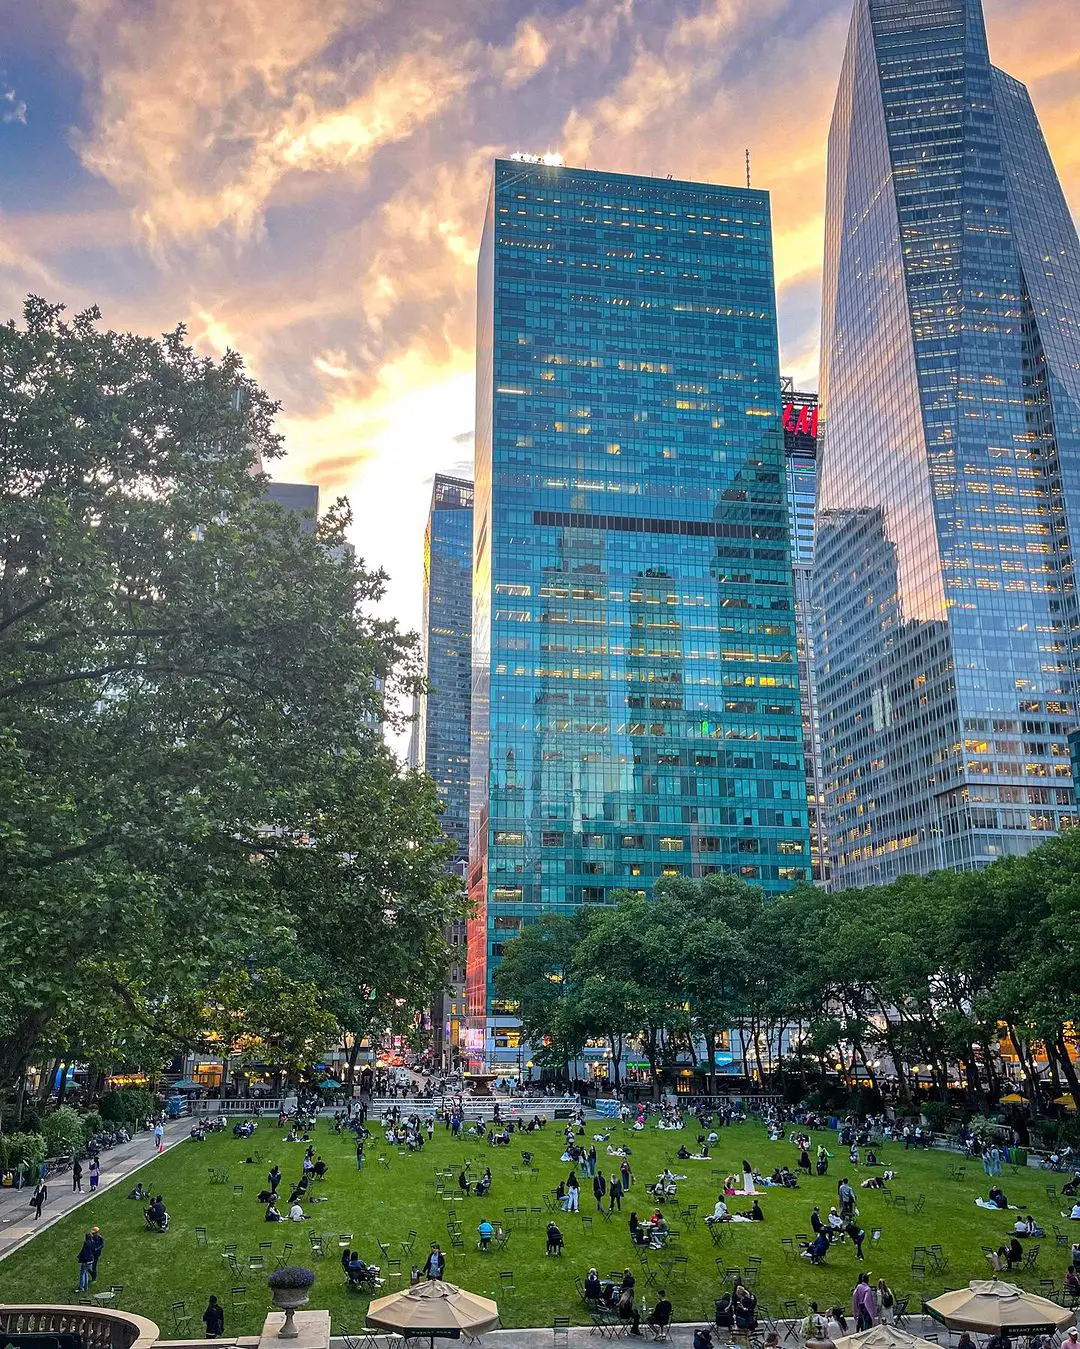 The beauty of New York in Bryant Park.